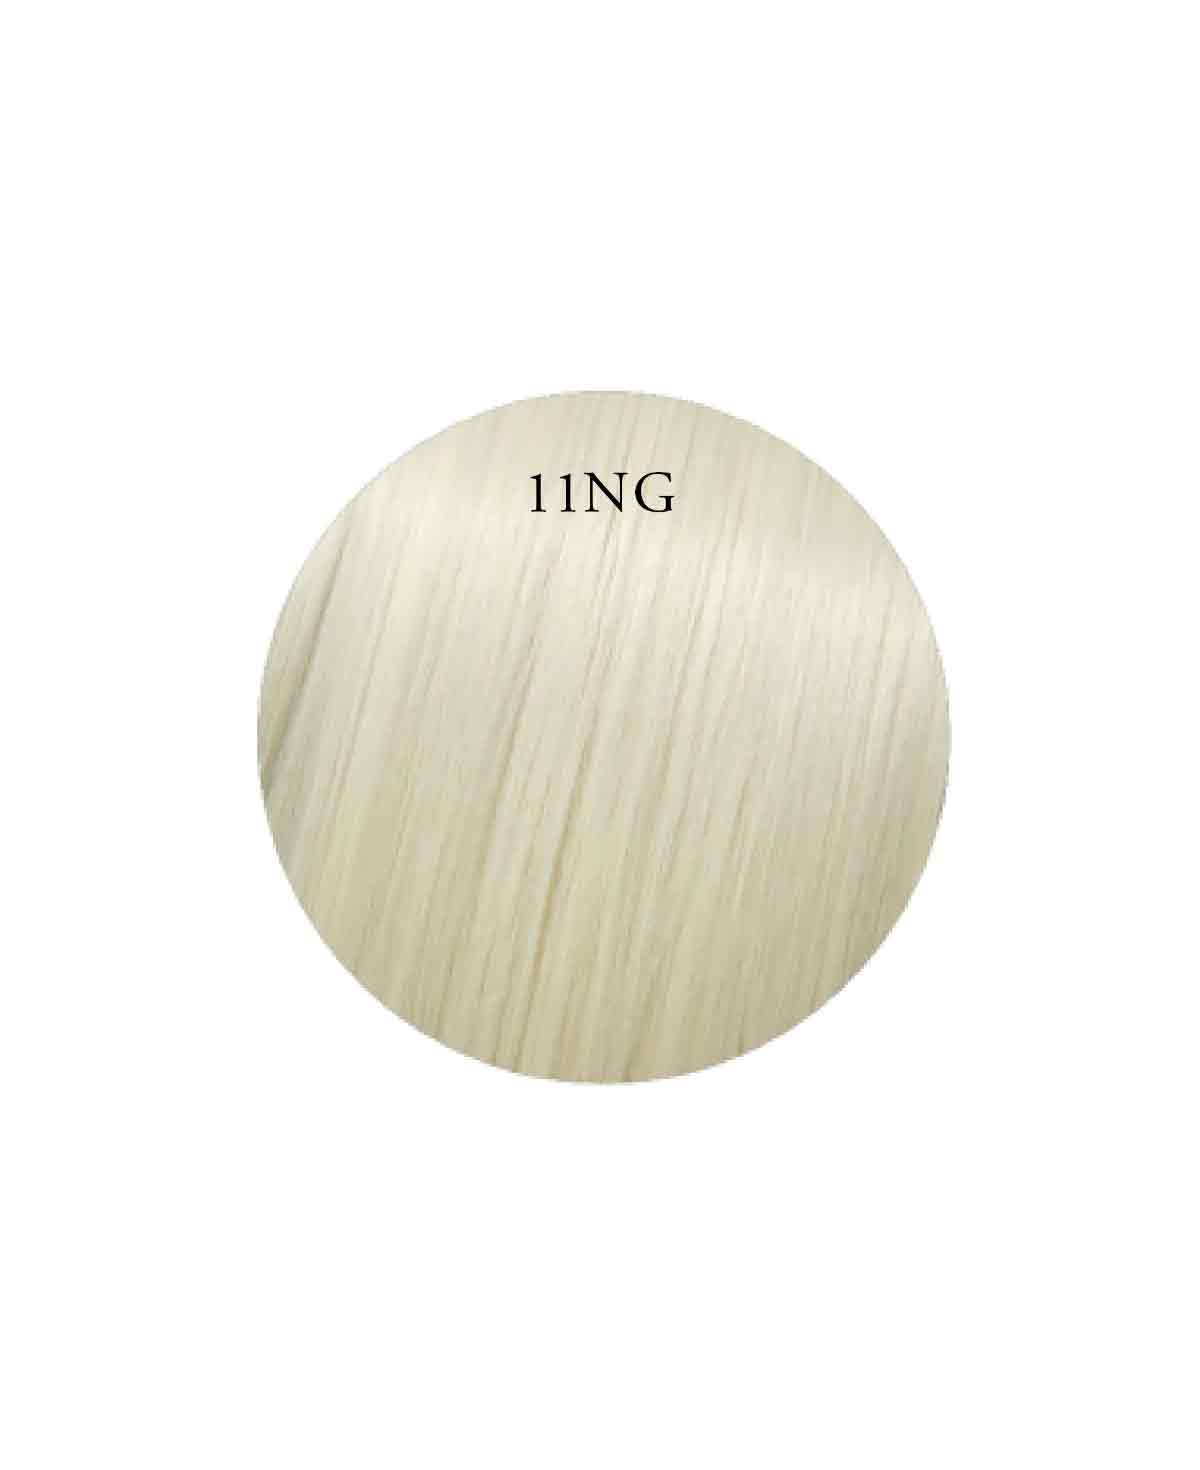 Showpony 45-50cm (20") Slim Tape Extensions - Silver Blonde - 11NG